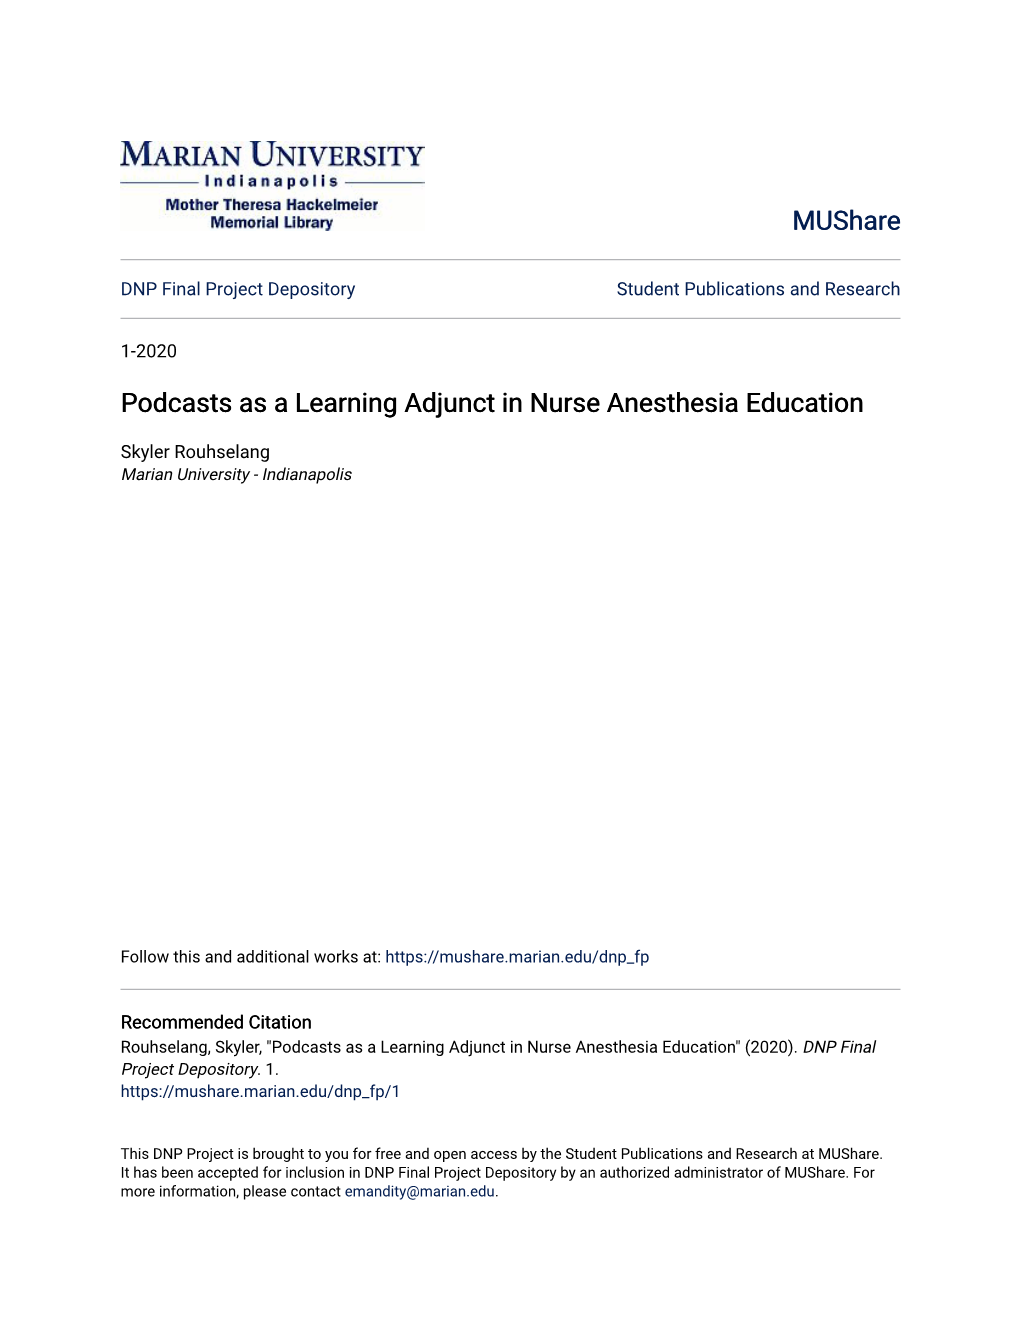 Podcasts As a Learning Adjunct in Nurse Anesthesia Education